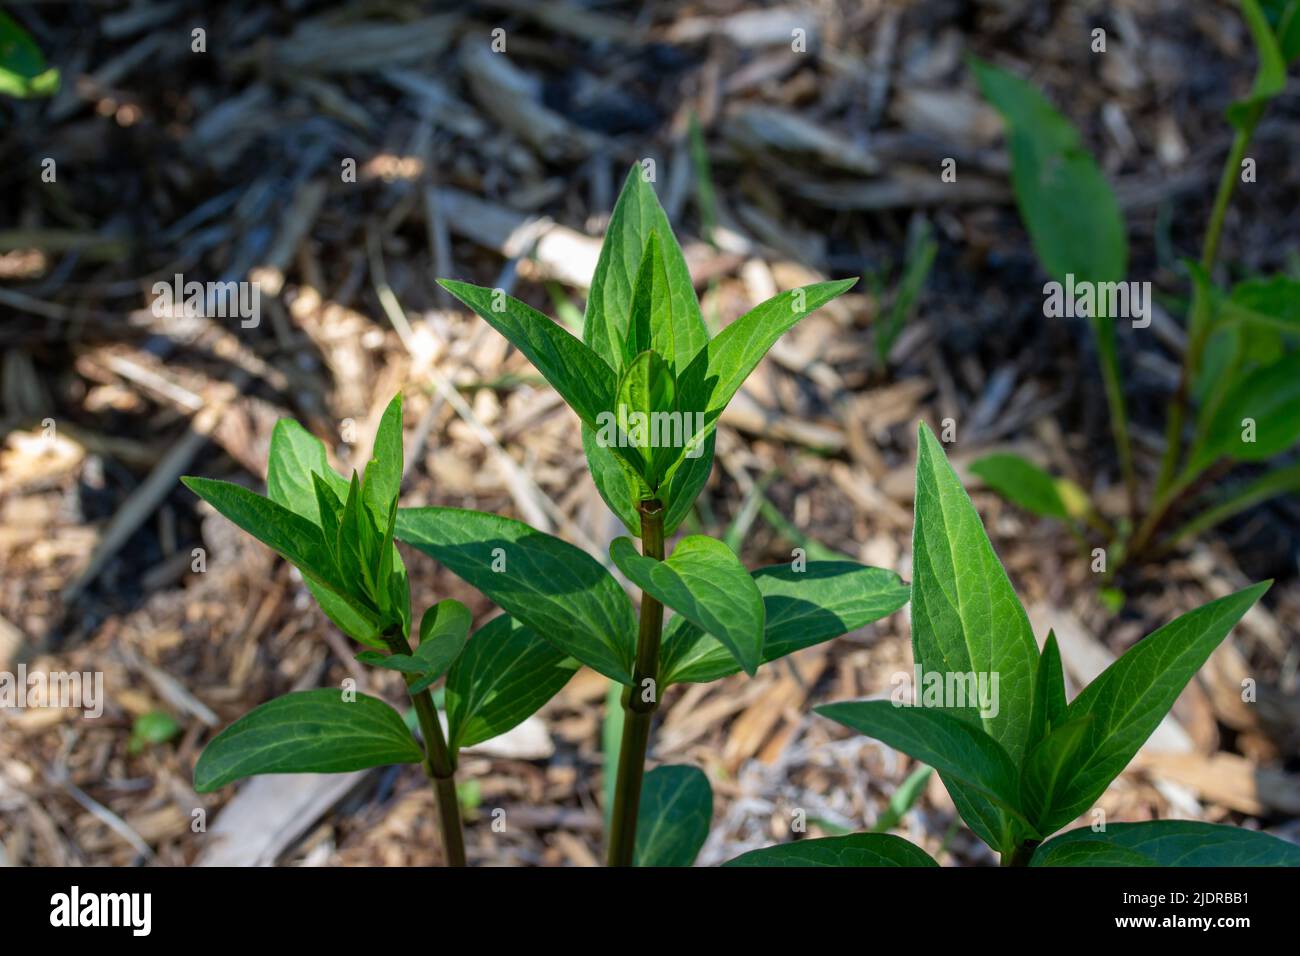 Close up view of a swamp milkweed plant (asclepias incarnata) emerging in a perennial garden Stock Photo